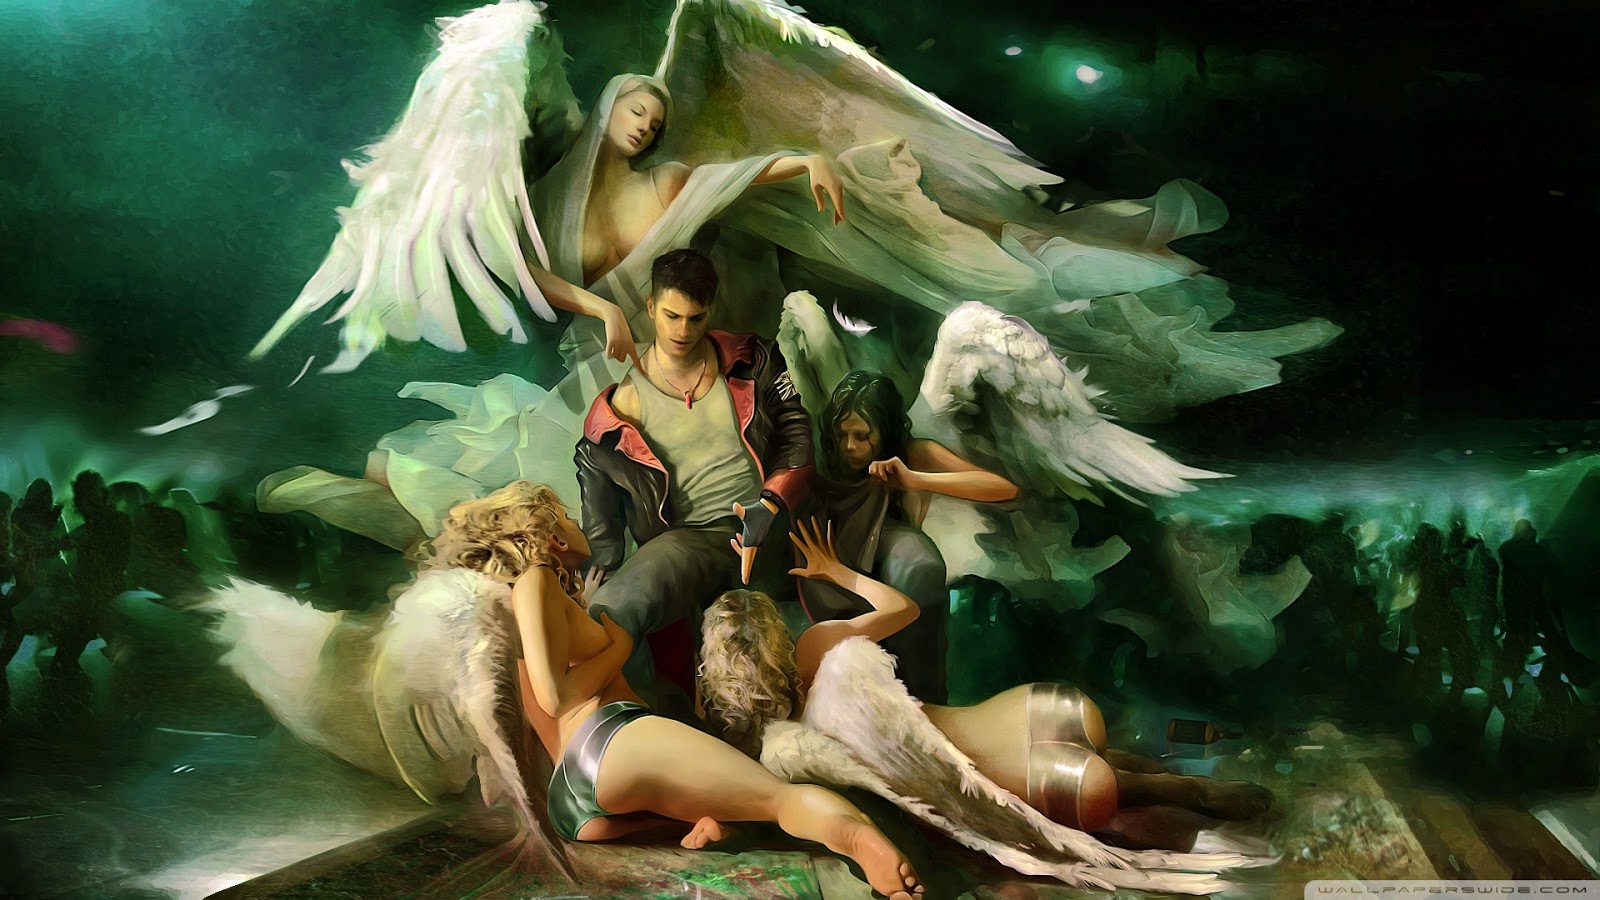 Crying wallpaper, devil may cry wallpaper | Amazing Wallpapers